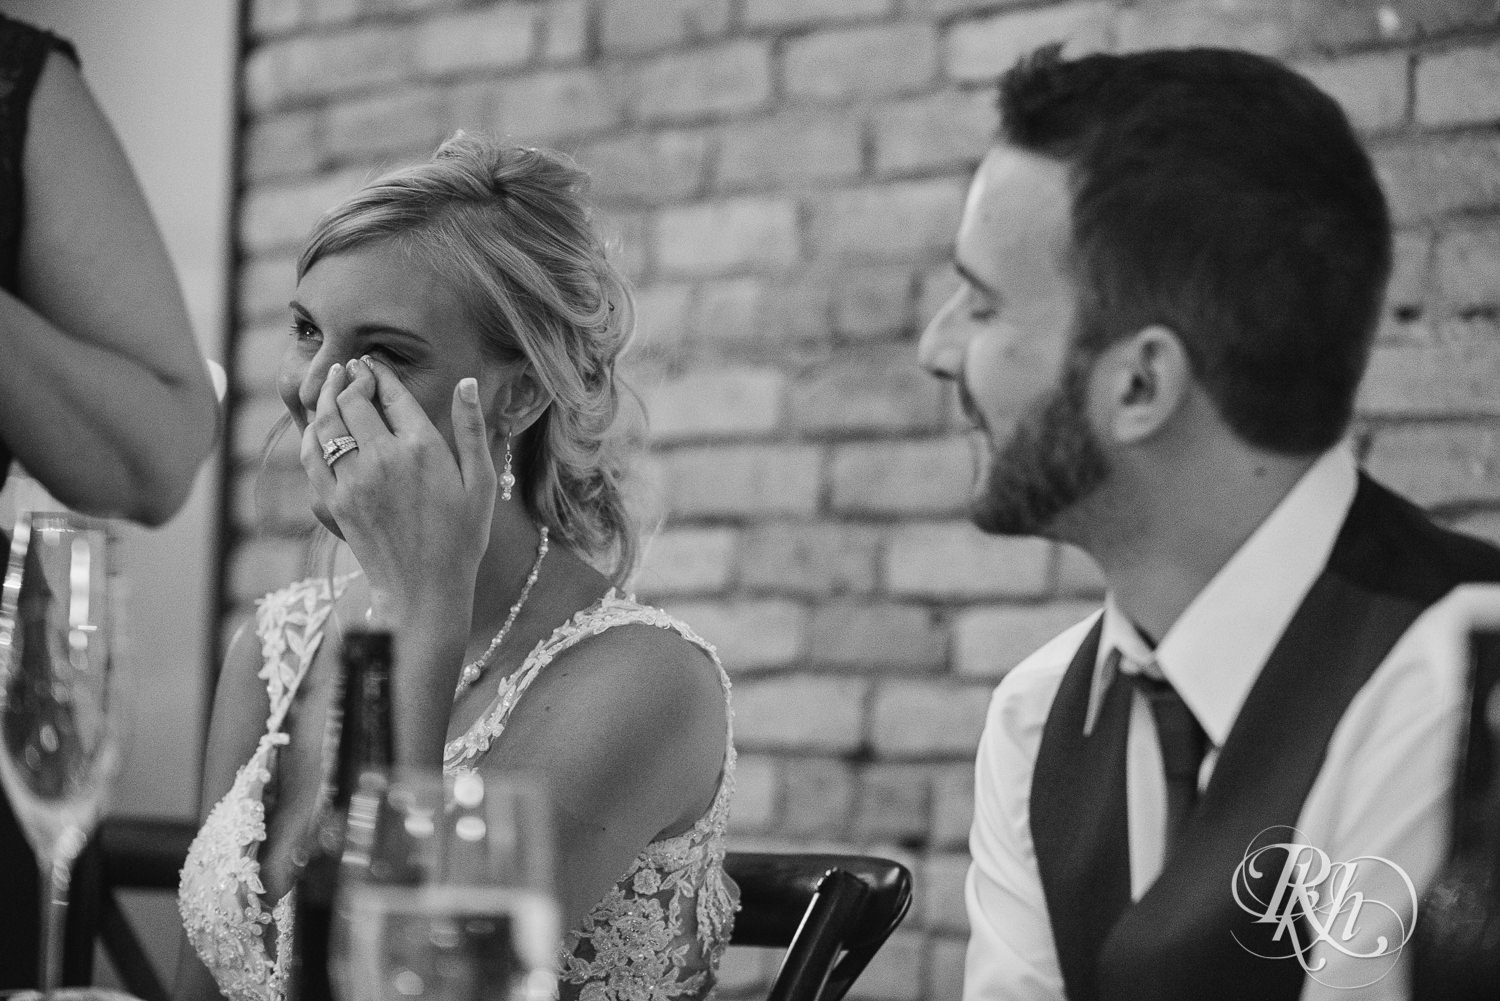 Bride and groom smile during speeches at wedding reception at the Lumber Exchange Event Center in Minneapolis, Minnesota.